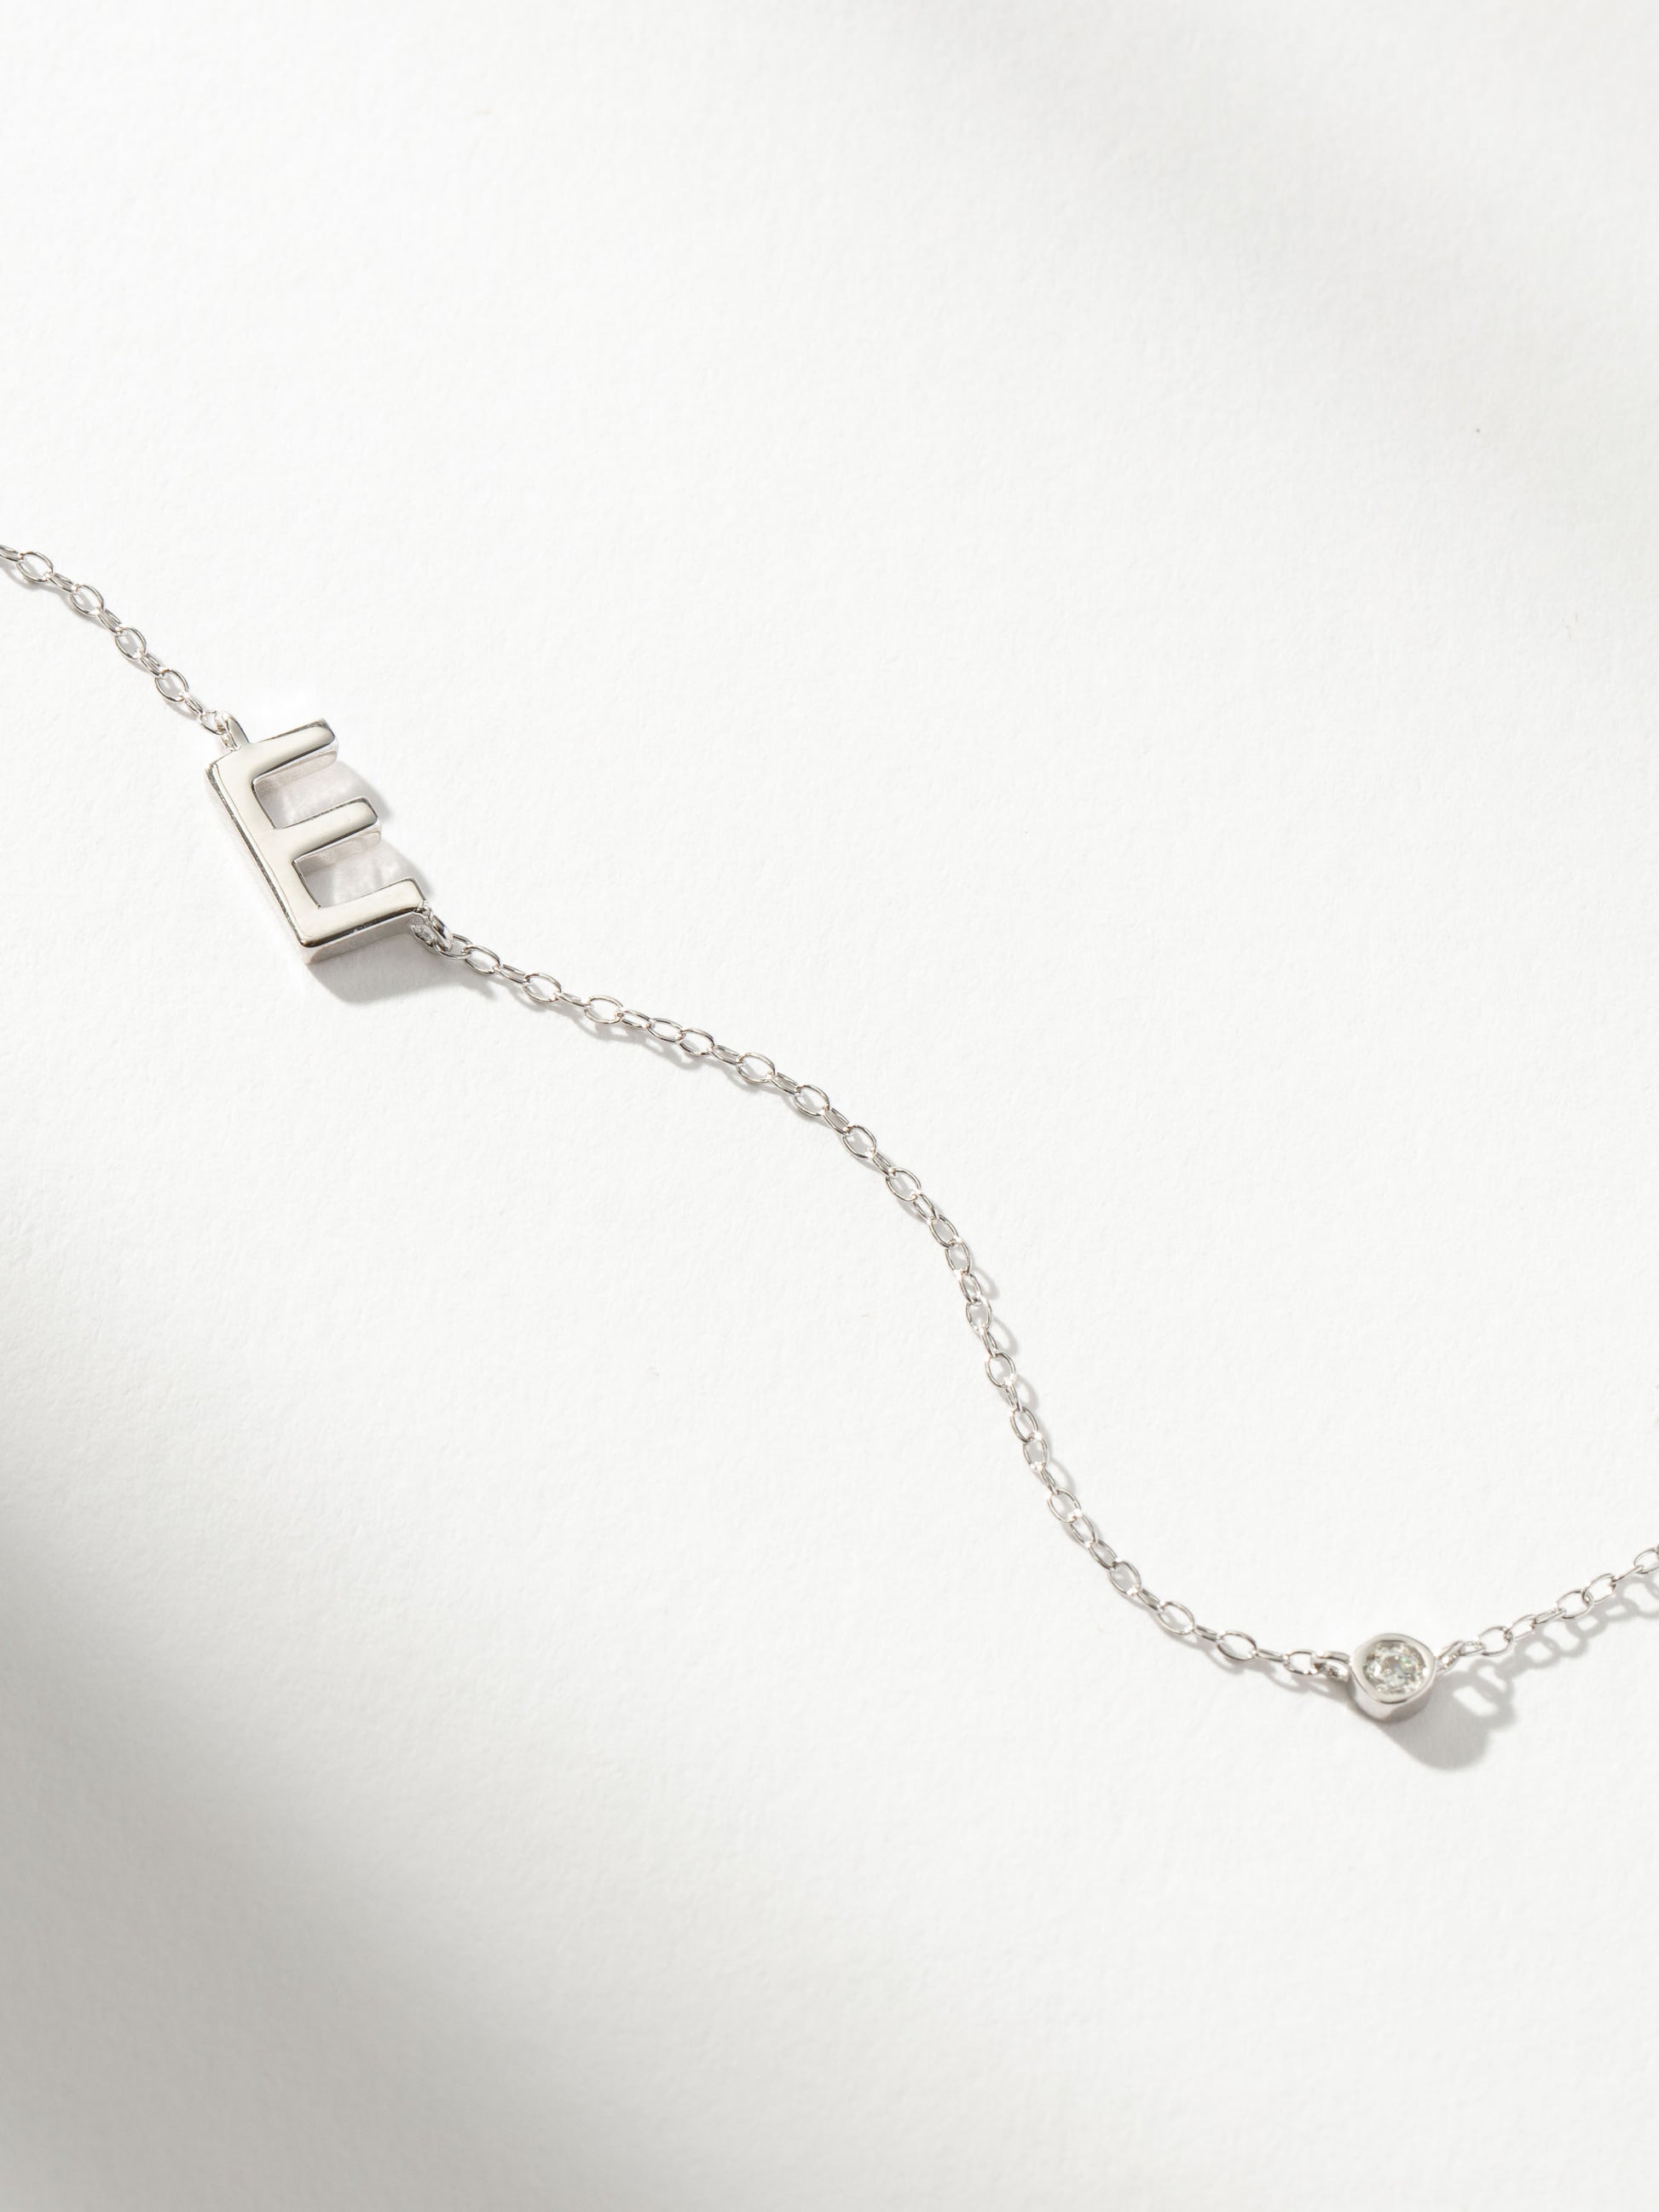 Personalized Touch Necklace | Sterling Silver E | Product Image | Uncommon James